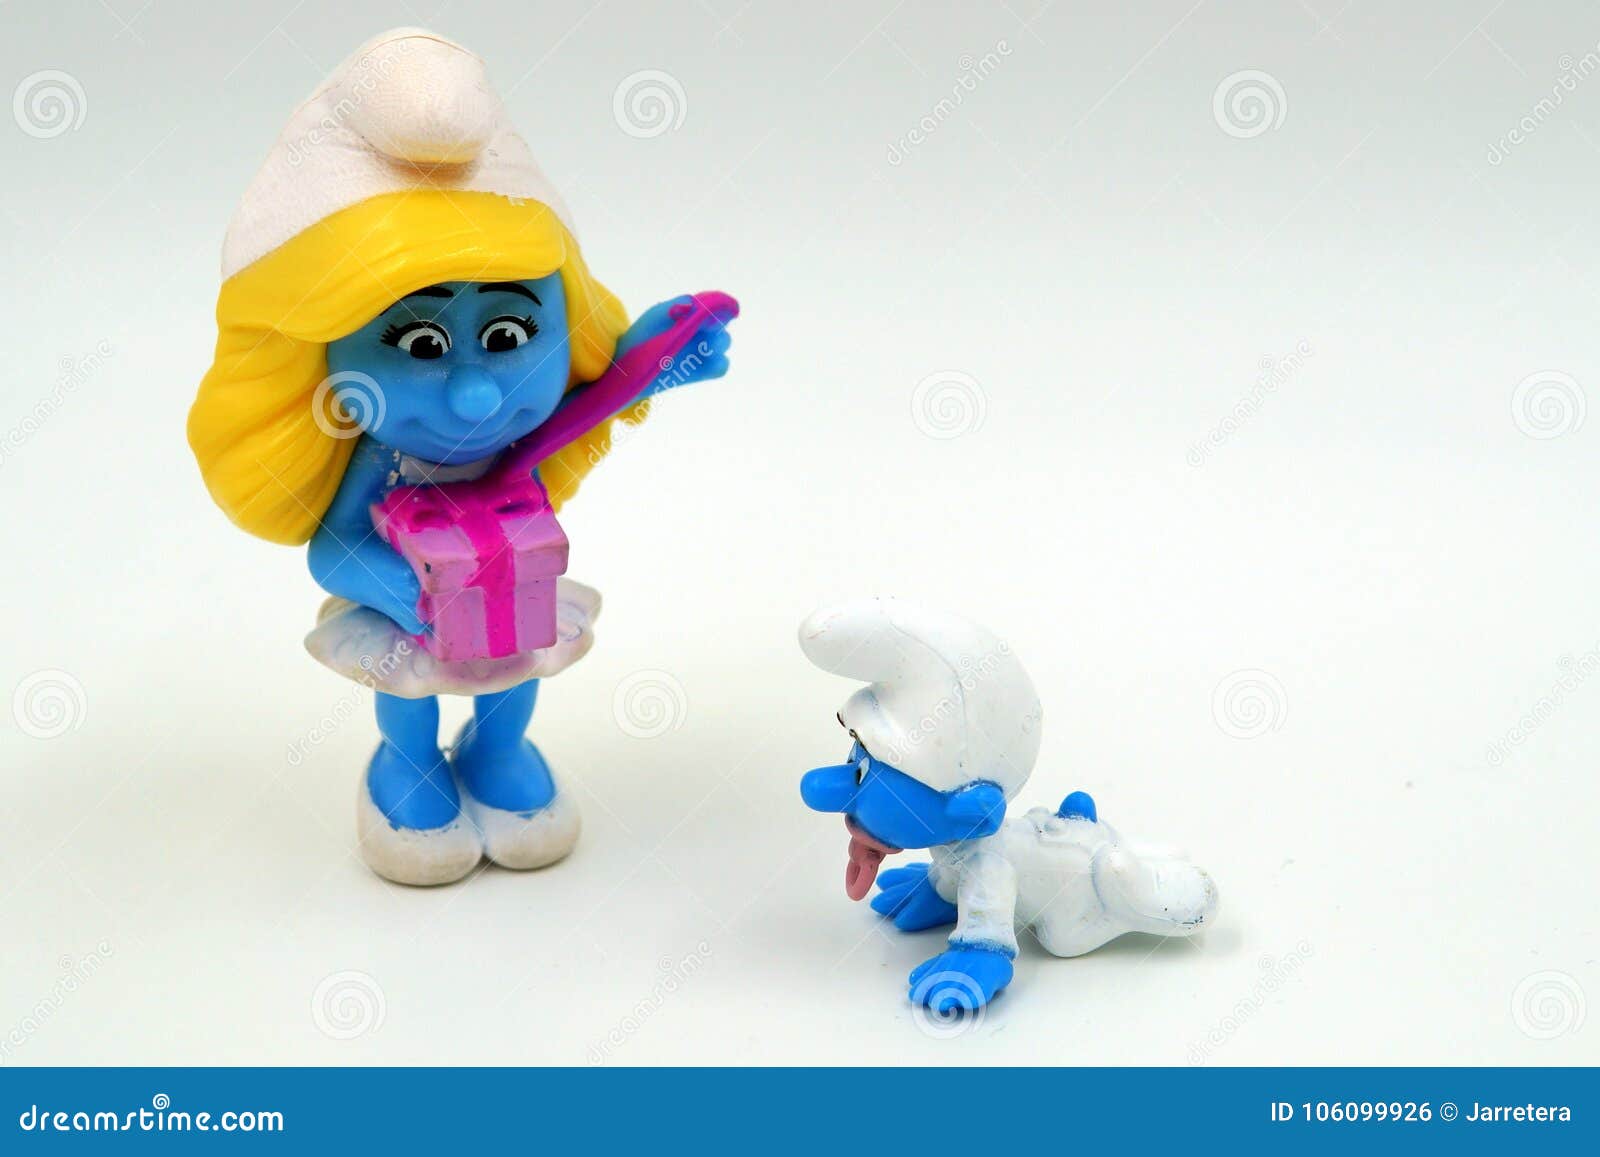 Buy The Smurfs smurfette standing plush toy white blue yellow